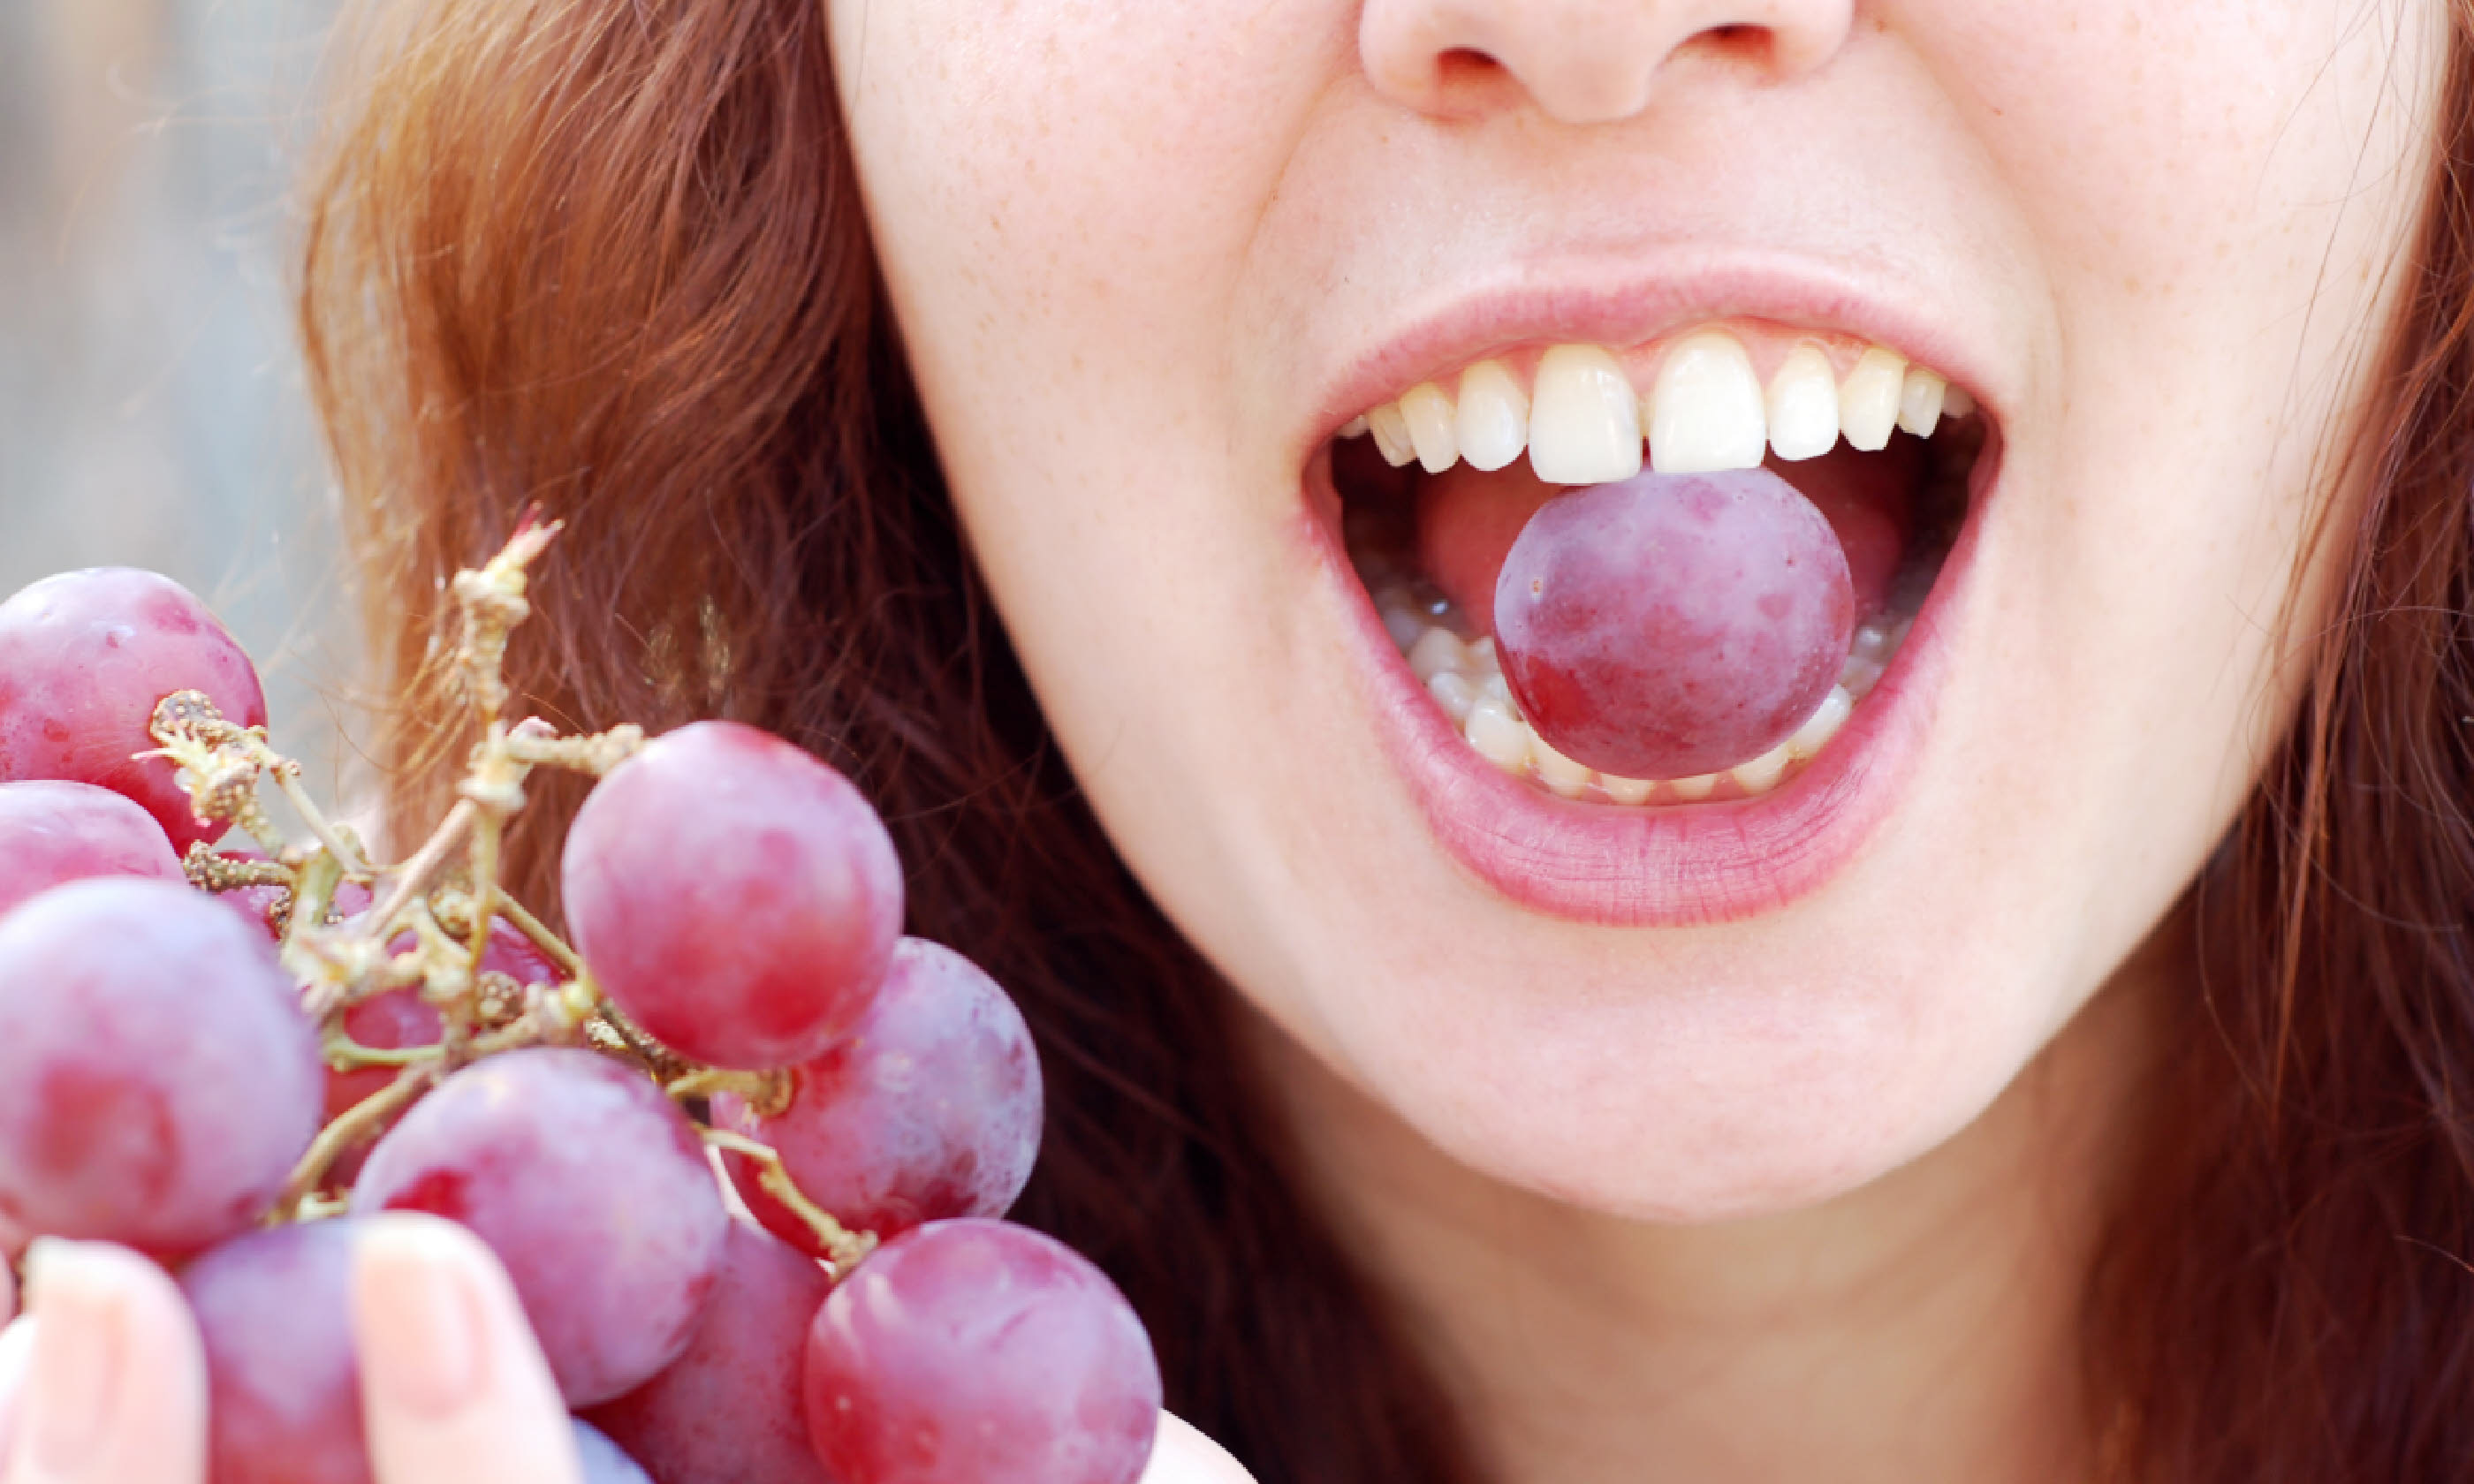 Eat 12 grapes at midnight (Shutterstock: see credit below)